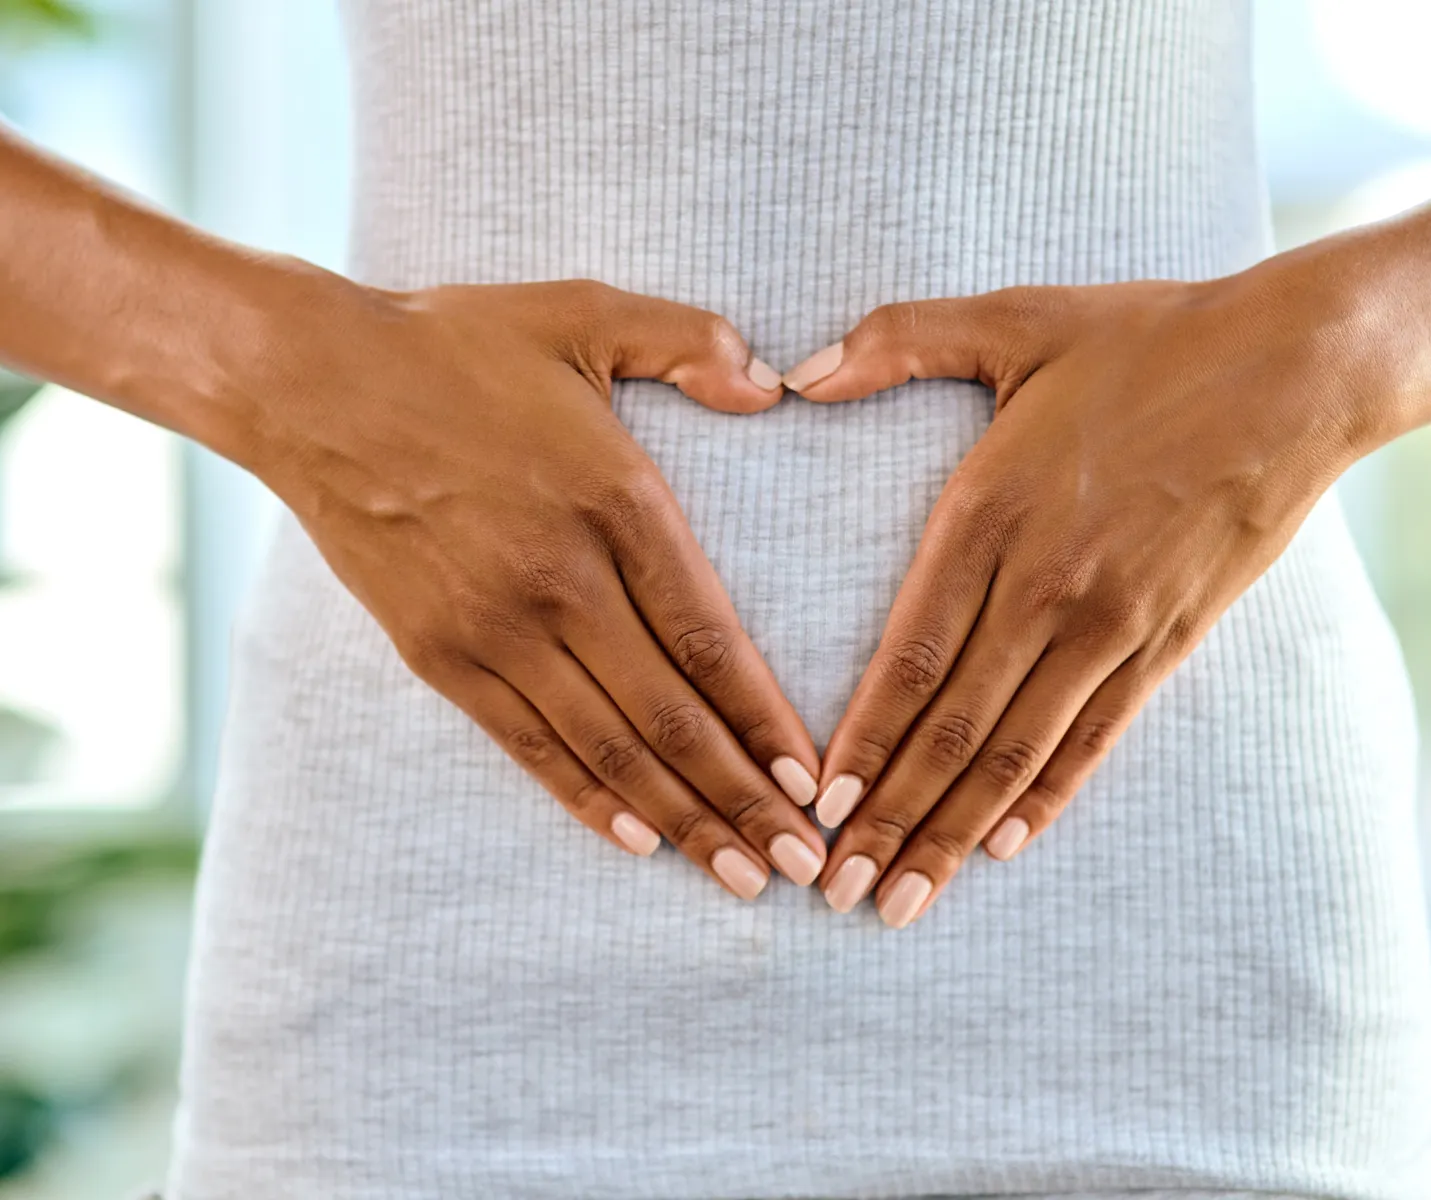 Improve Your Digestion with These 4 Gut Health Tips